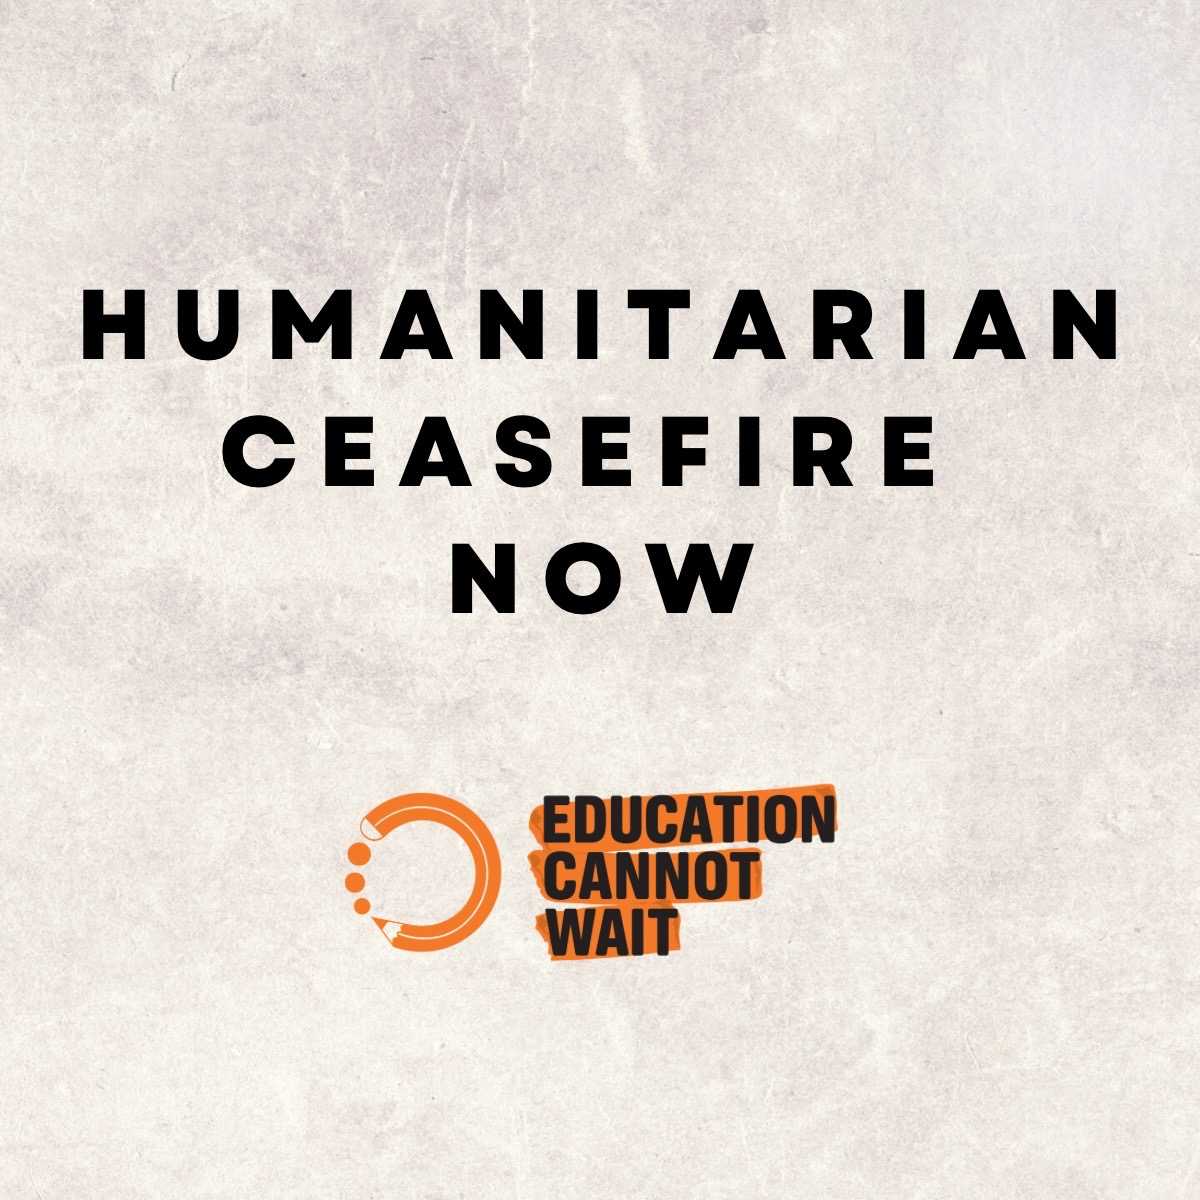 #ECW supports global calls for an immediate humanitarian ceasefire in #Gaza now. All humanitarians and the children and families they serve must be protected. They are #NotATarget! @un @ungeneva @unrwa @unocha @unhumanrights @un_news_centre @unlazzarini #CeasefireNOW